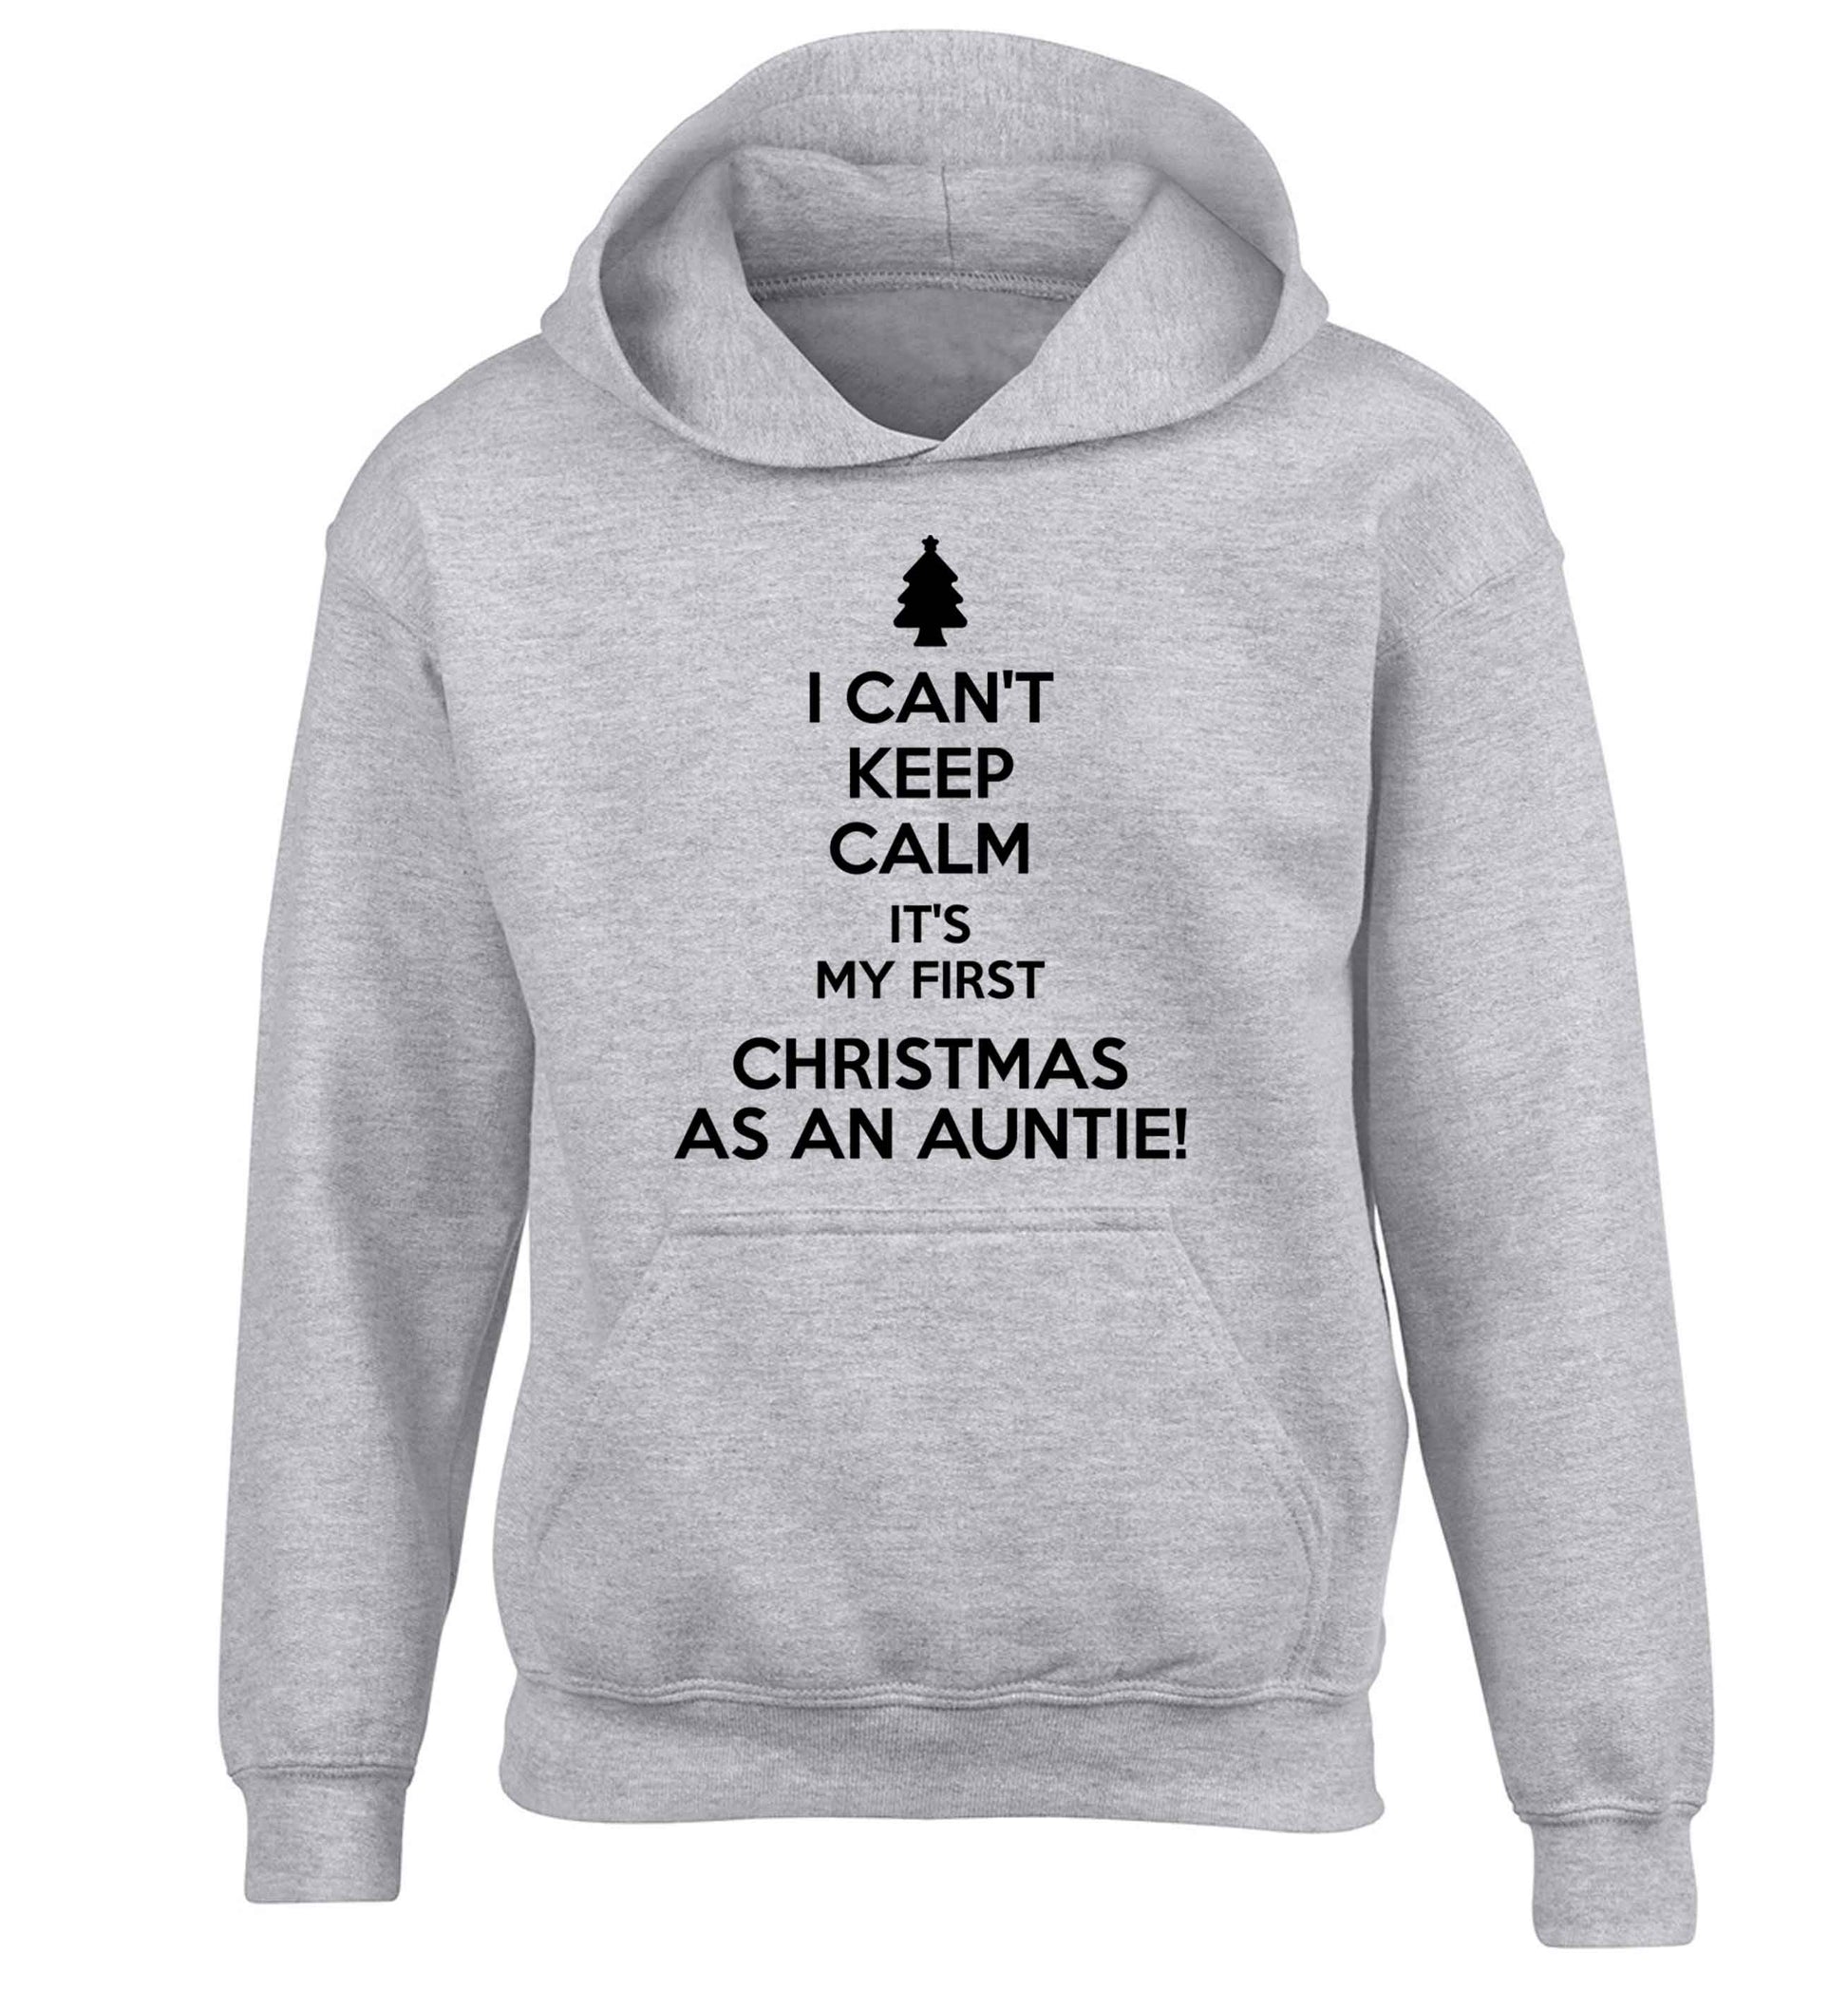 I can't keep calm it's my first Christmas as an auntie! children's grey hoodie 12-13 Years